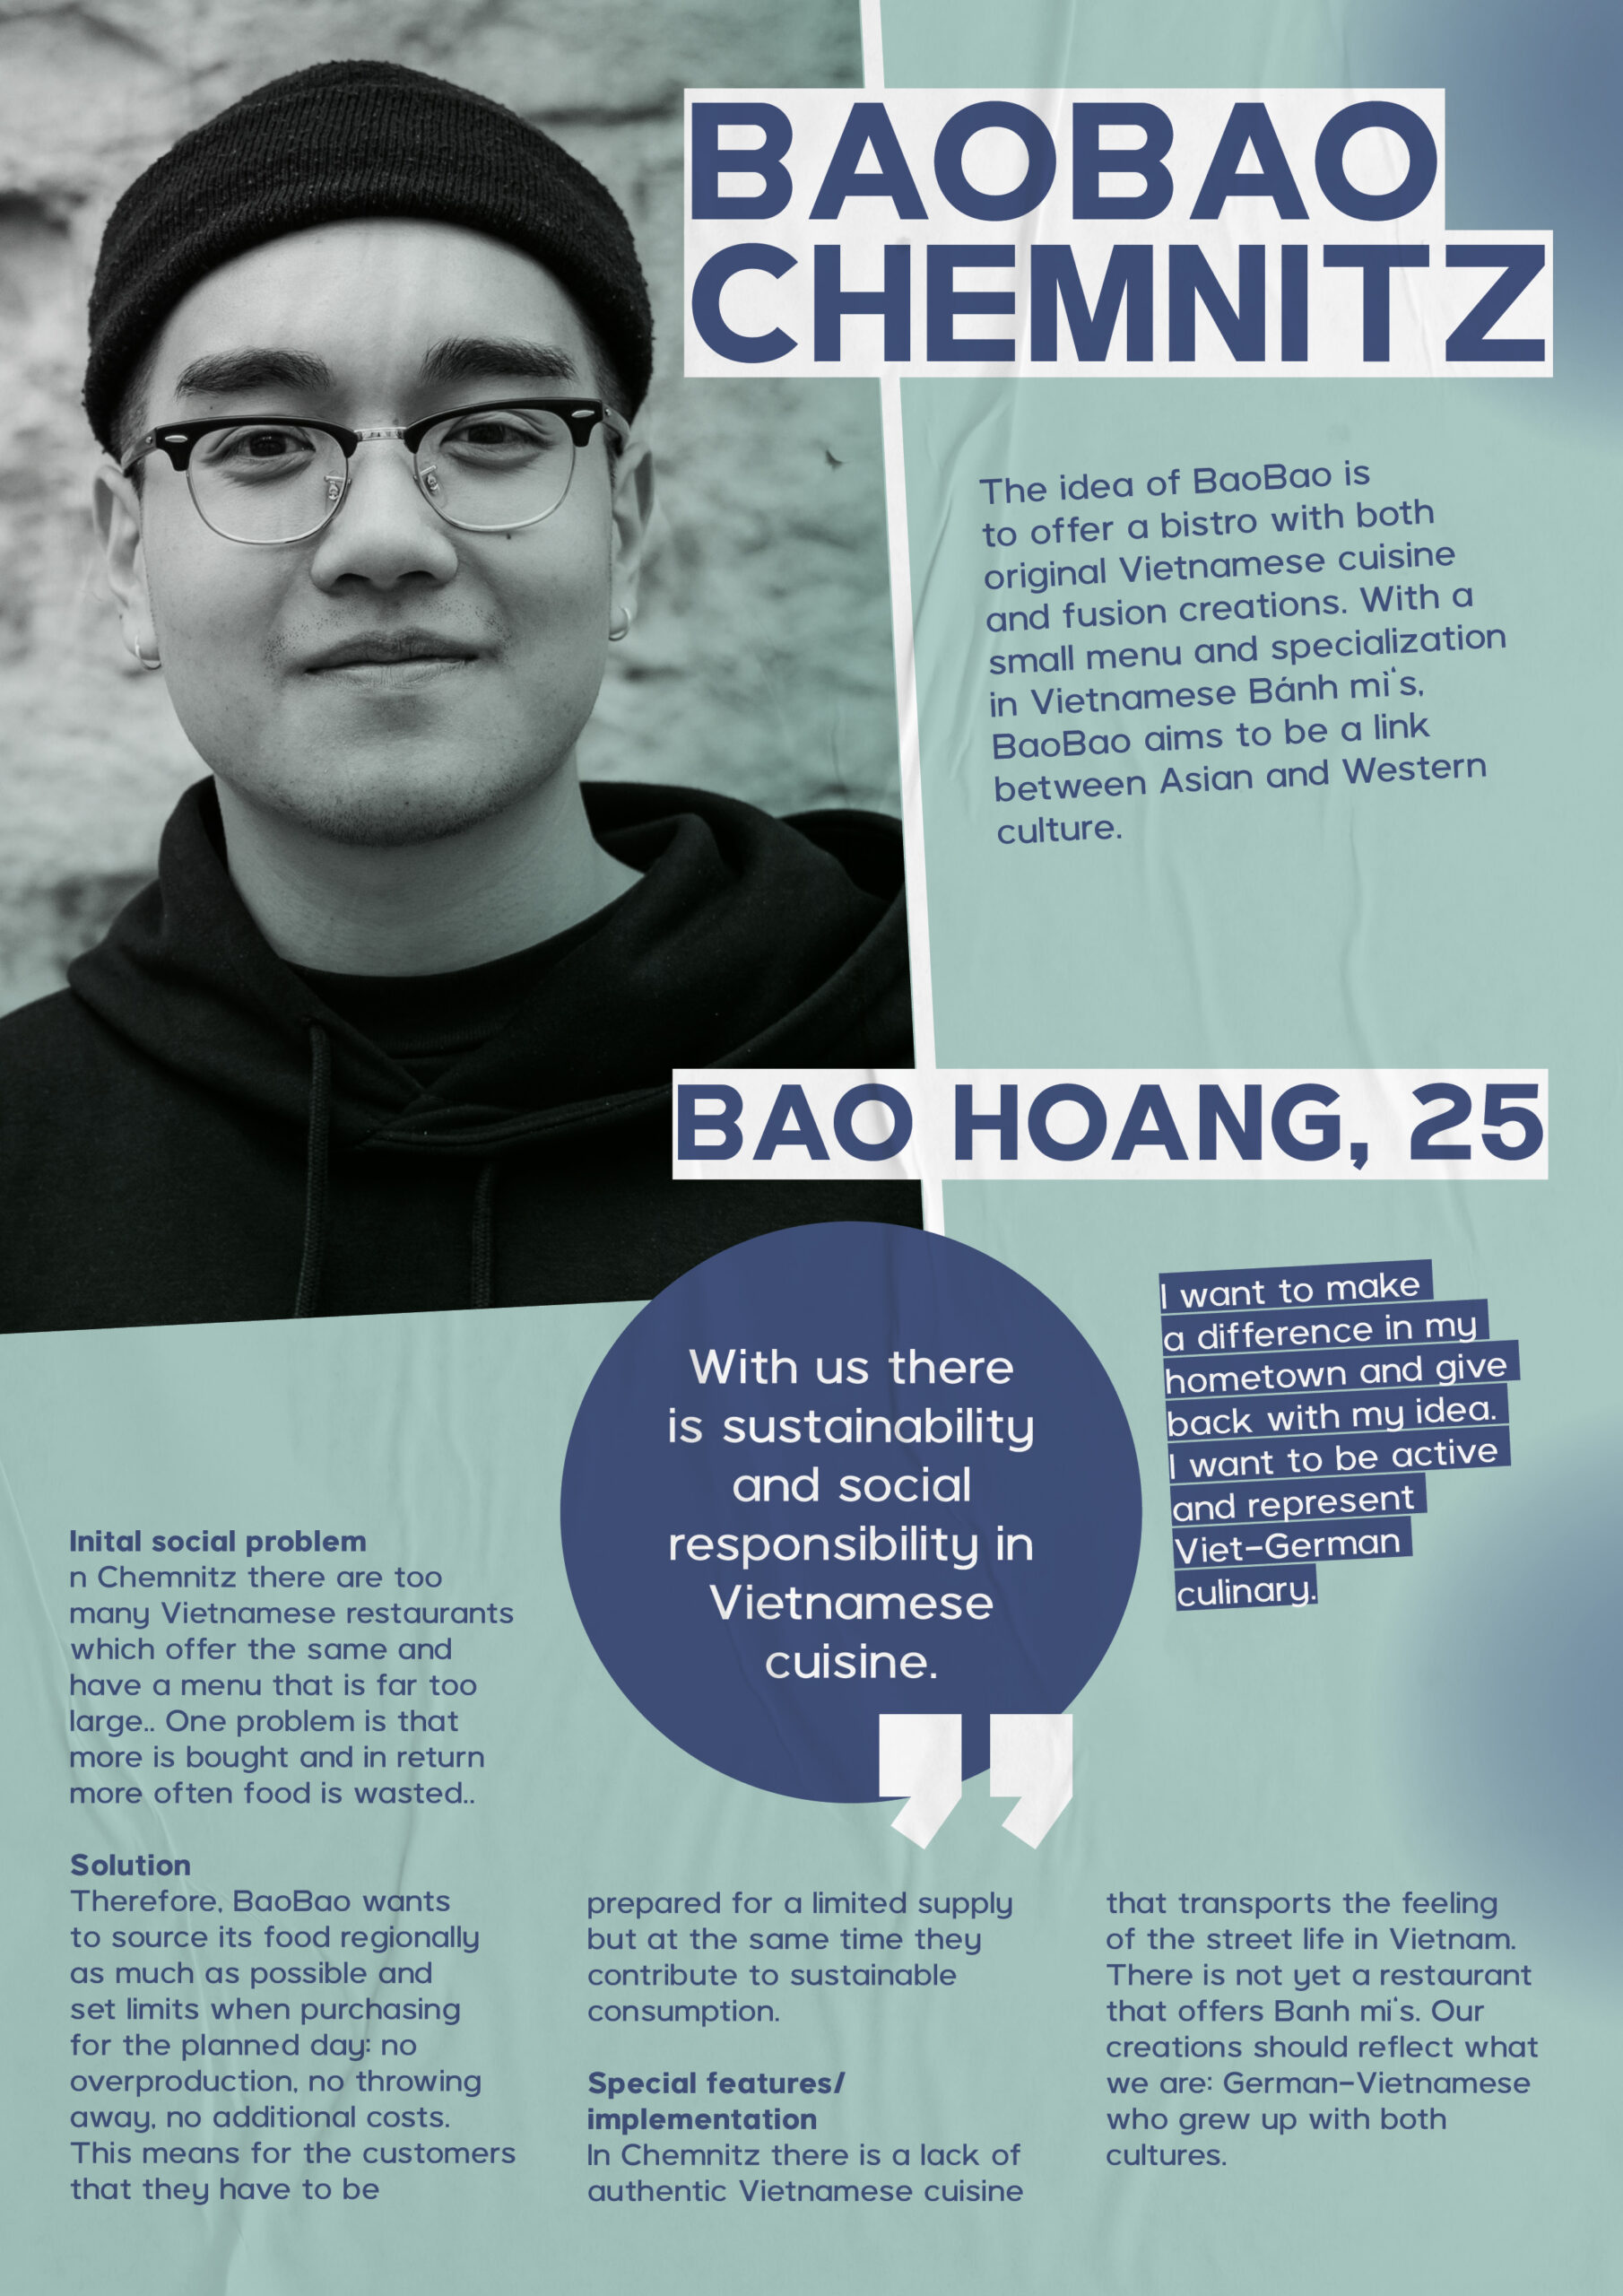 Bao Hoang, 25, with his idea of BaoBao, a bistro that wants to offer both original Vietnamese and fusion creations.